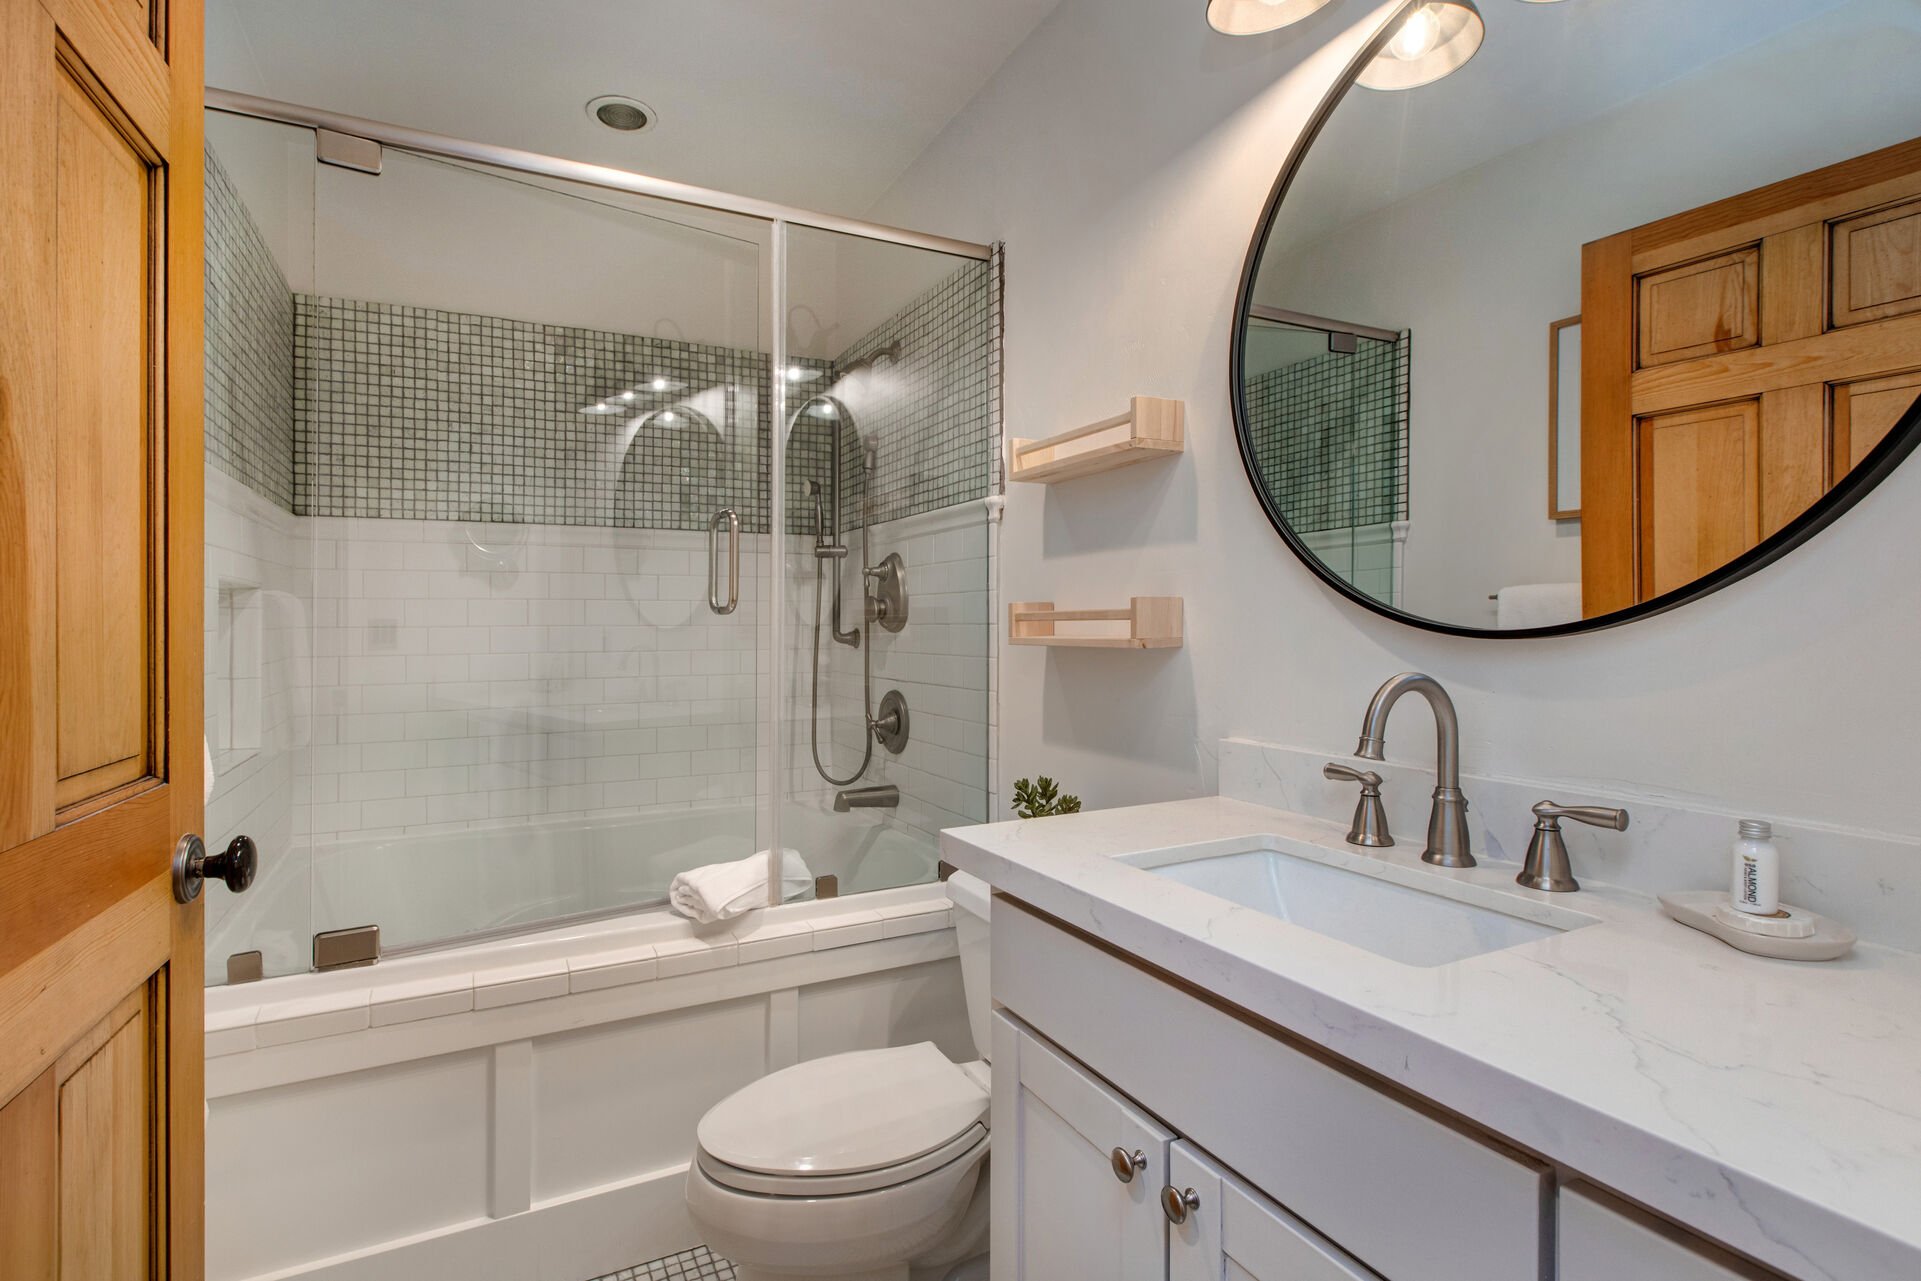 Main Level Full Bathroom with large tub/shower combo with detachable shower head, and beautiful stone countertops